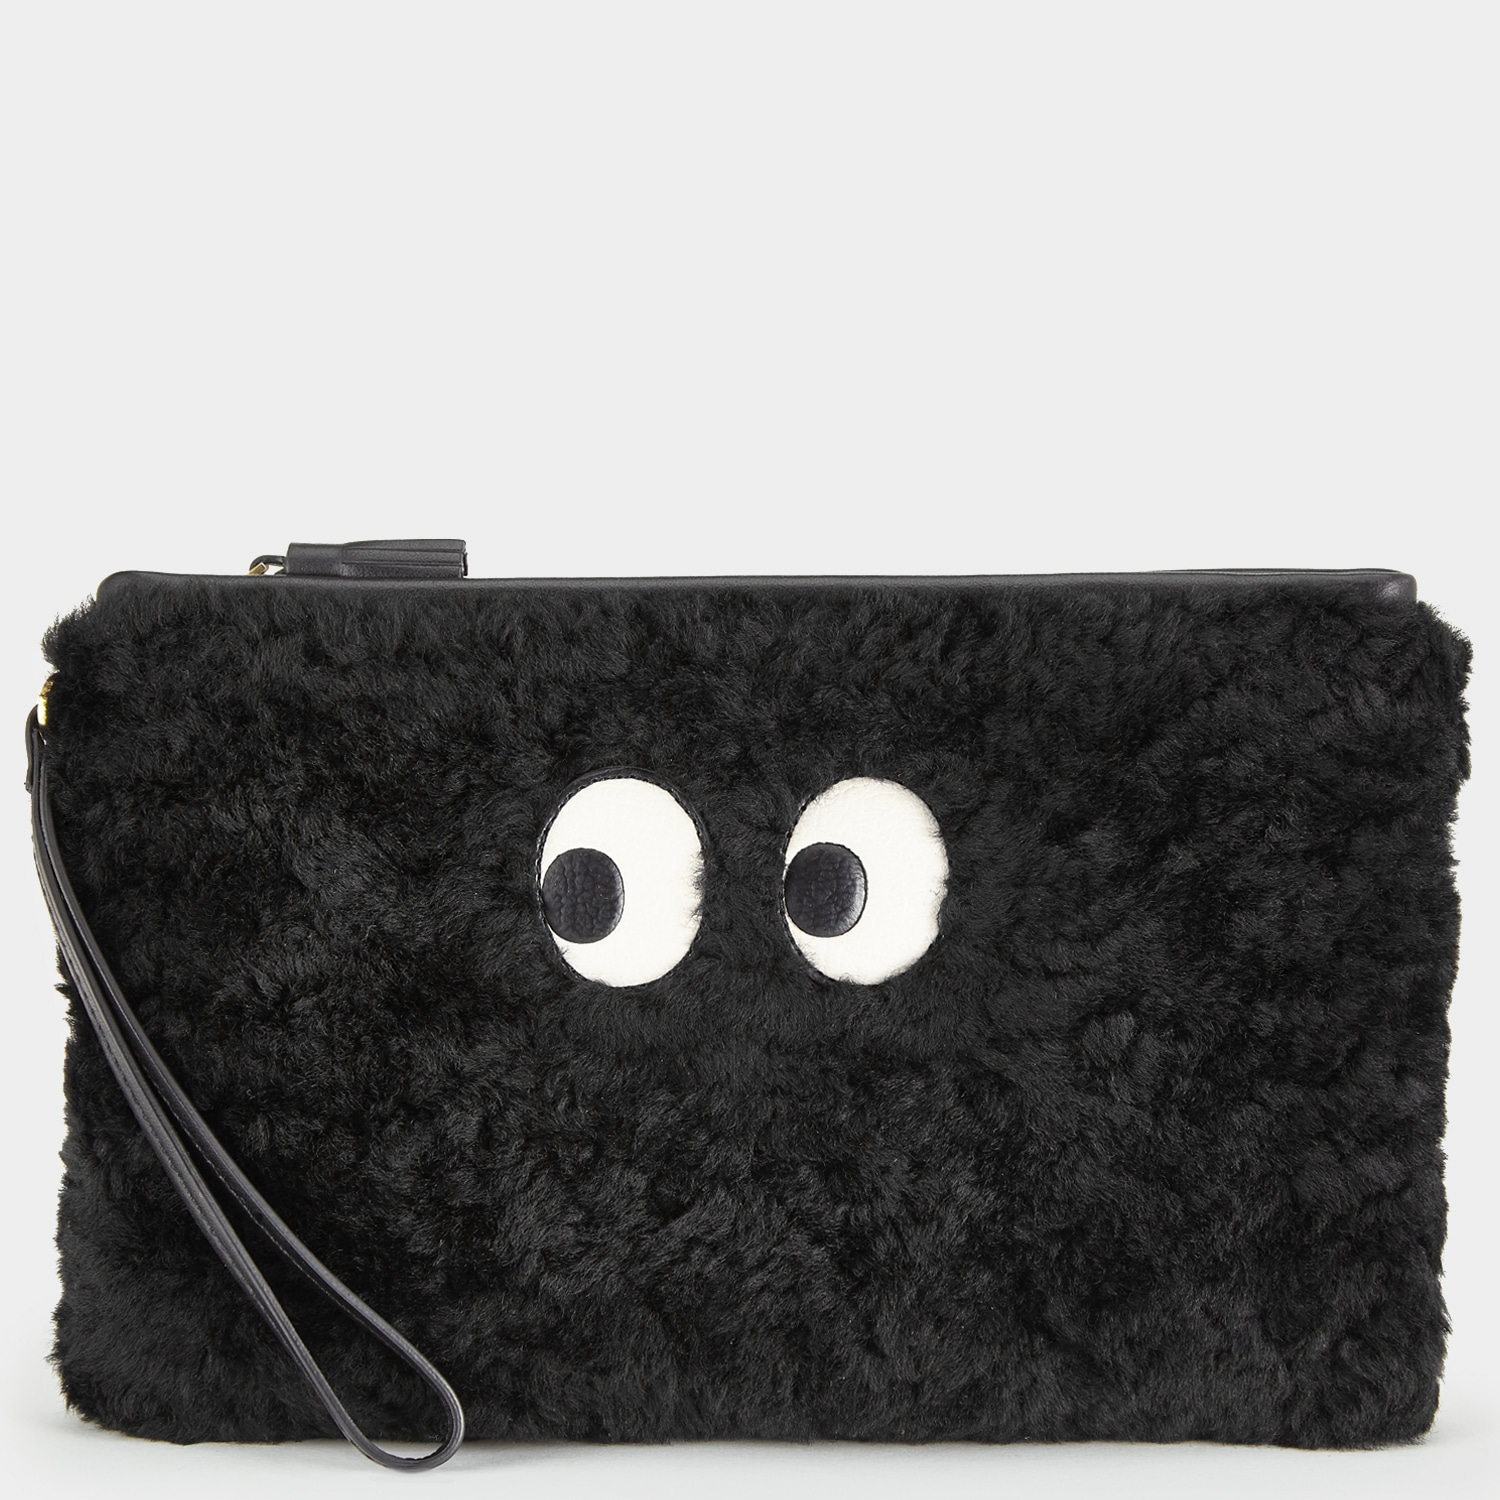 Anya Hindmarch Shearling Ghost Bag Reference Guide - Spotted Fashion